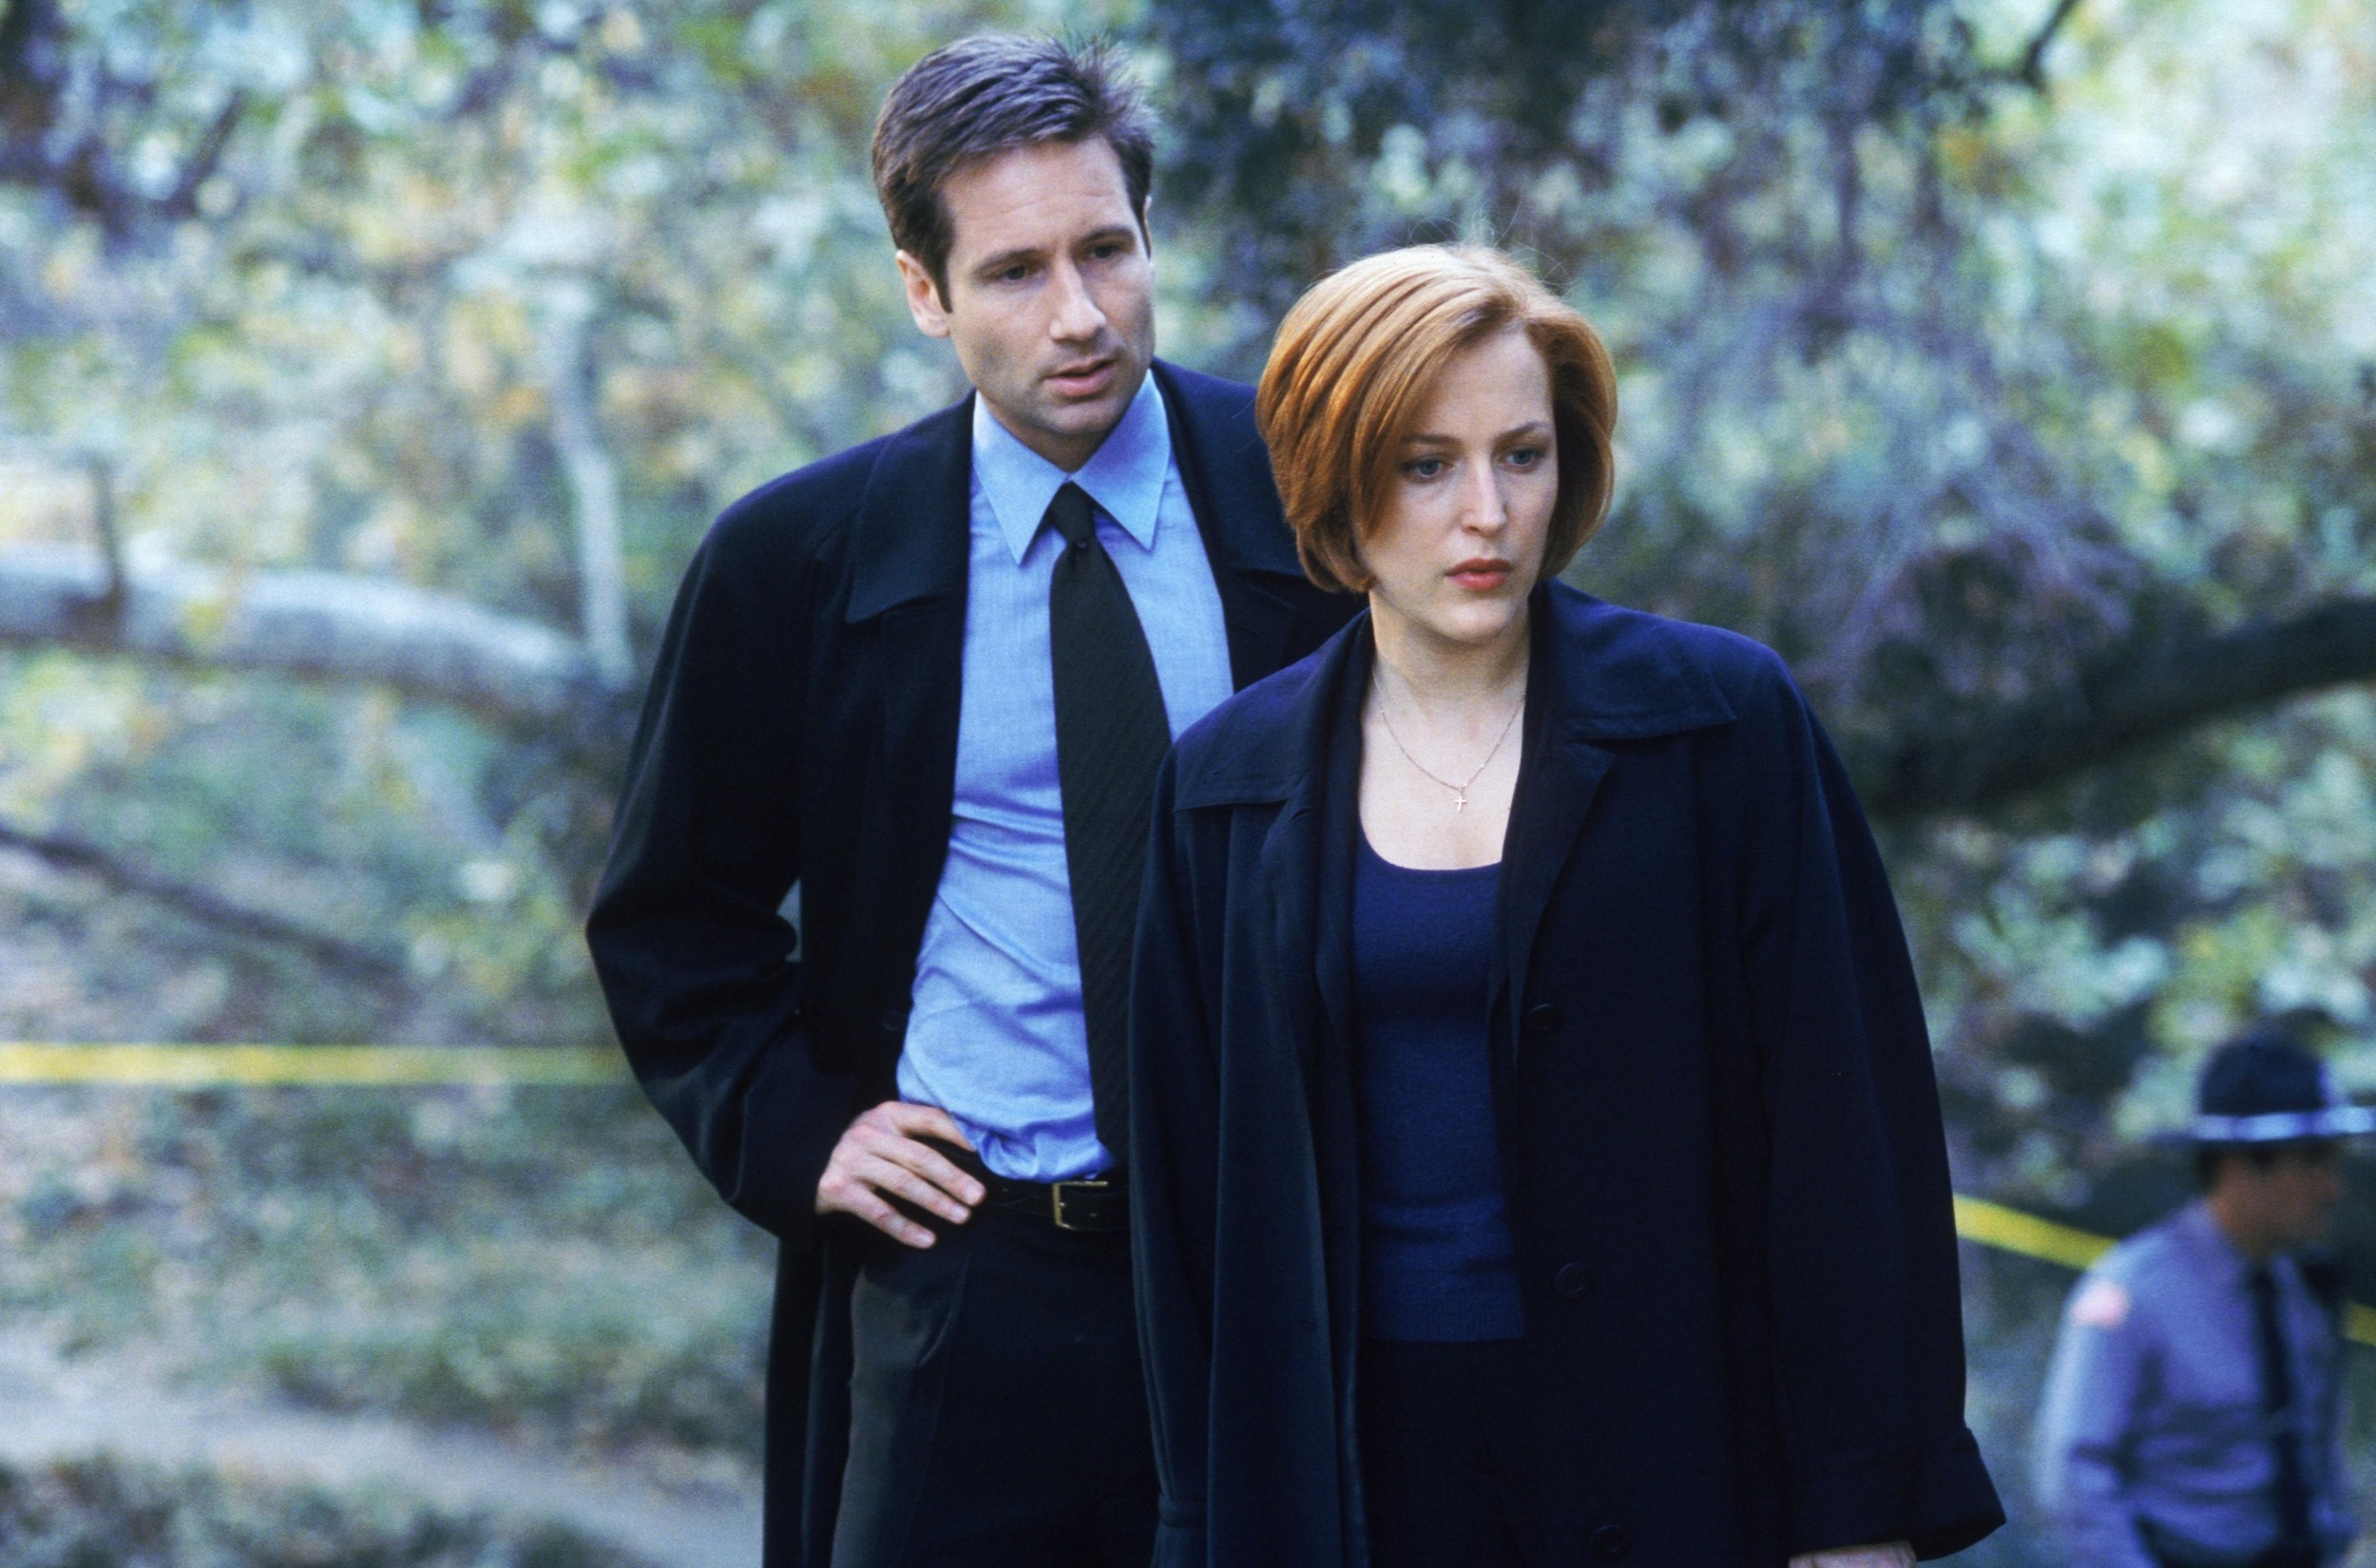 <p>If there’s one show that embodies the 1990s fascination with aliens and the supernatural, it would be <span><em>The X-Files</em>. </span>In part, the series’ enduring appeal stems from the chemistry between Gillian Anderson’s Dana Scully and David Duchovny’s Fox Mulder, who make one of the most dynamic duos in TV history. However, it was also a show that excelled at exploring the darker corners of the human psyche and the ever-present fear of the unknown and the unexplained. Ultimately, the series poses the uncomfortable idea that there might really be things out there that defy rational explanation, making it so pleasurable and unsettling.</p><p>You may also like: <a href='https://www.yardbarker.com/entertainment/articles/these_sitcoms_had_the_best_running_jokes_120723/s1__38941021'>These sitcoms had the best running jokes</a></p>